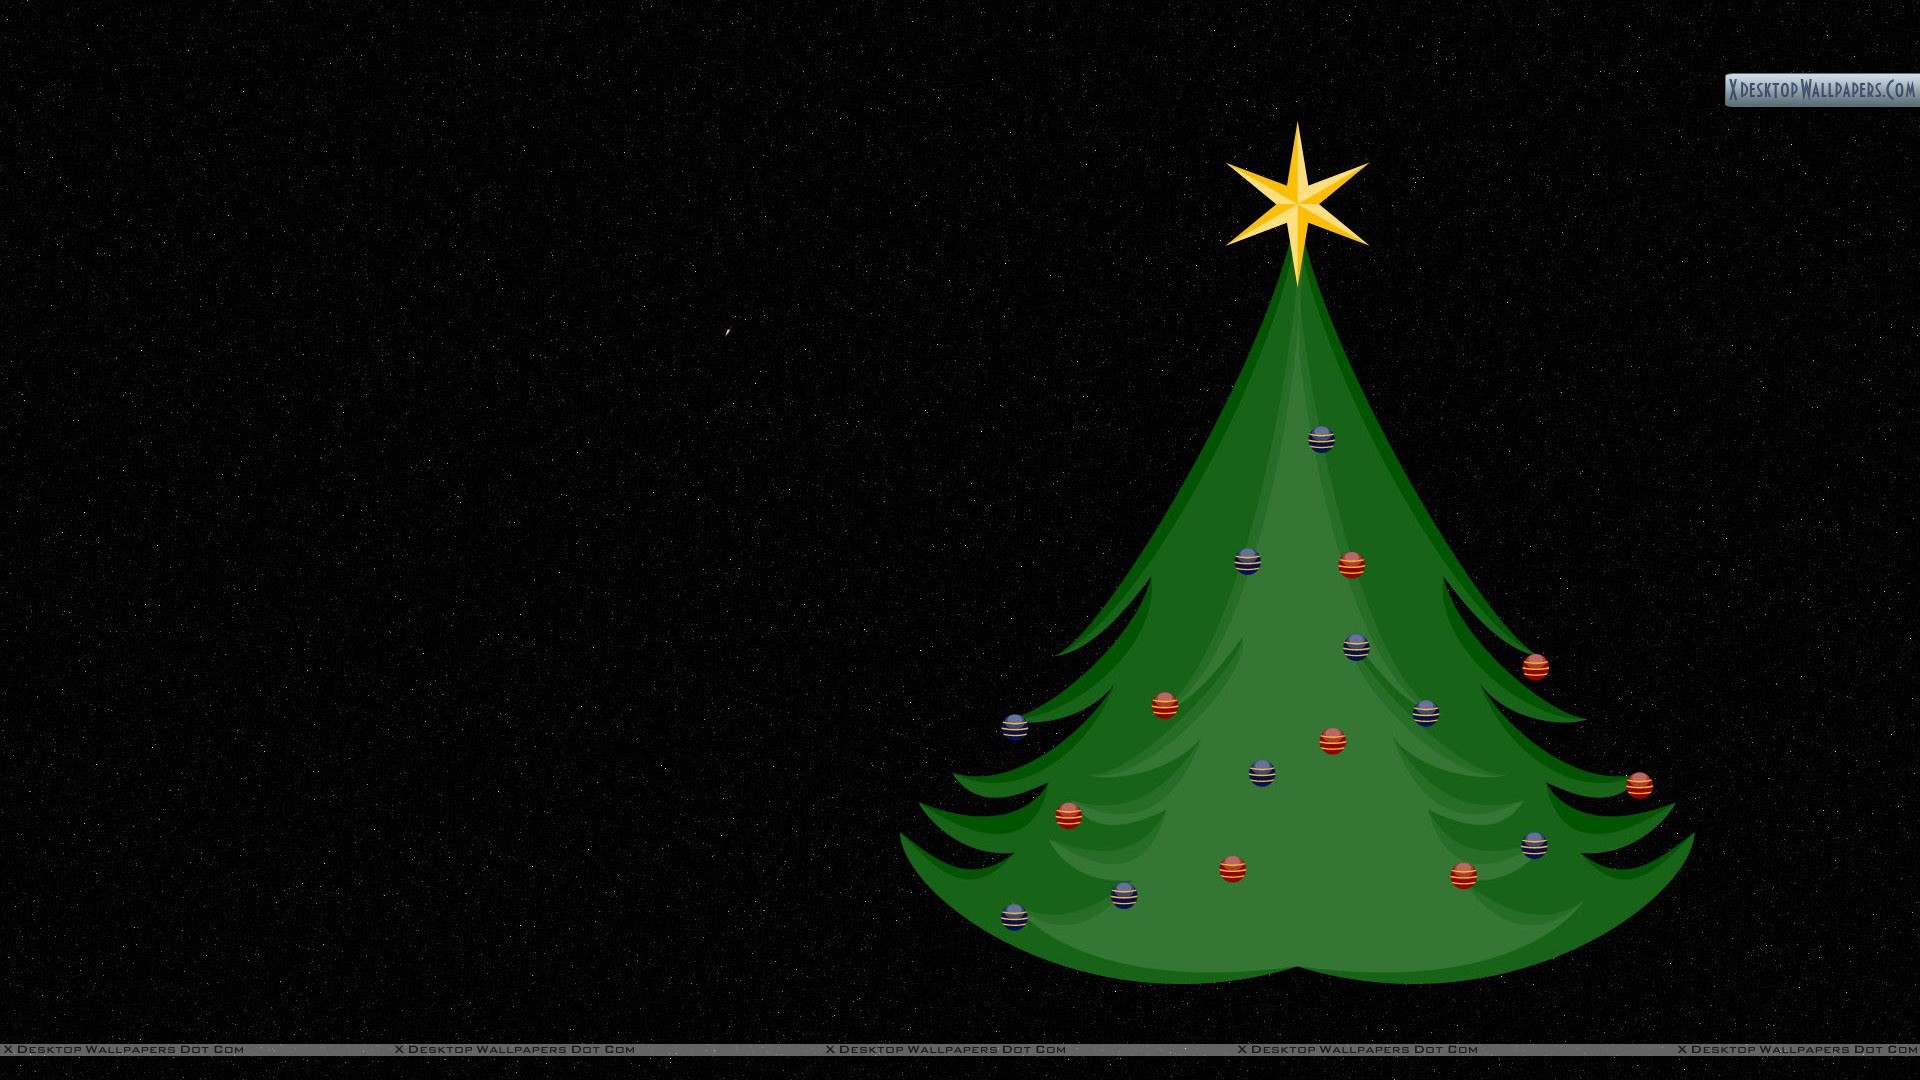 1920x1080 You are viewing wallpaper titled "Christmas Tree With Black Background" ...